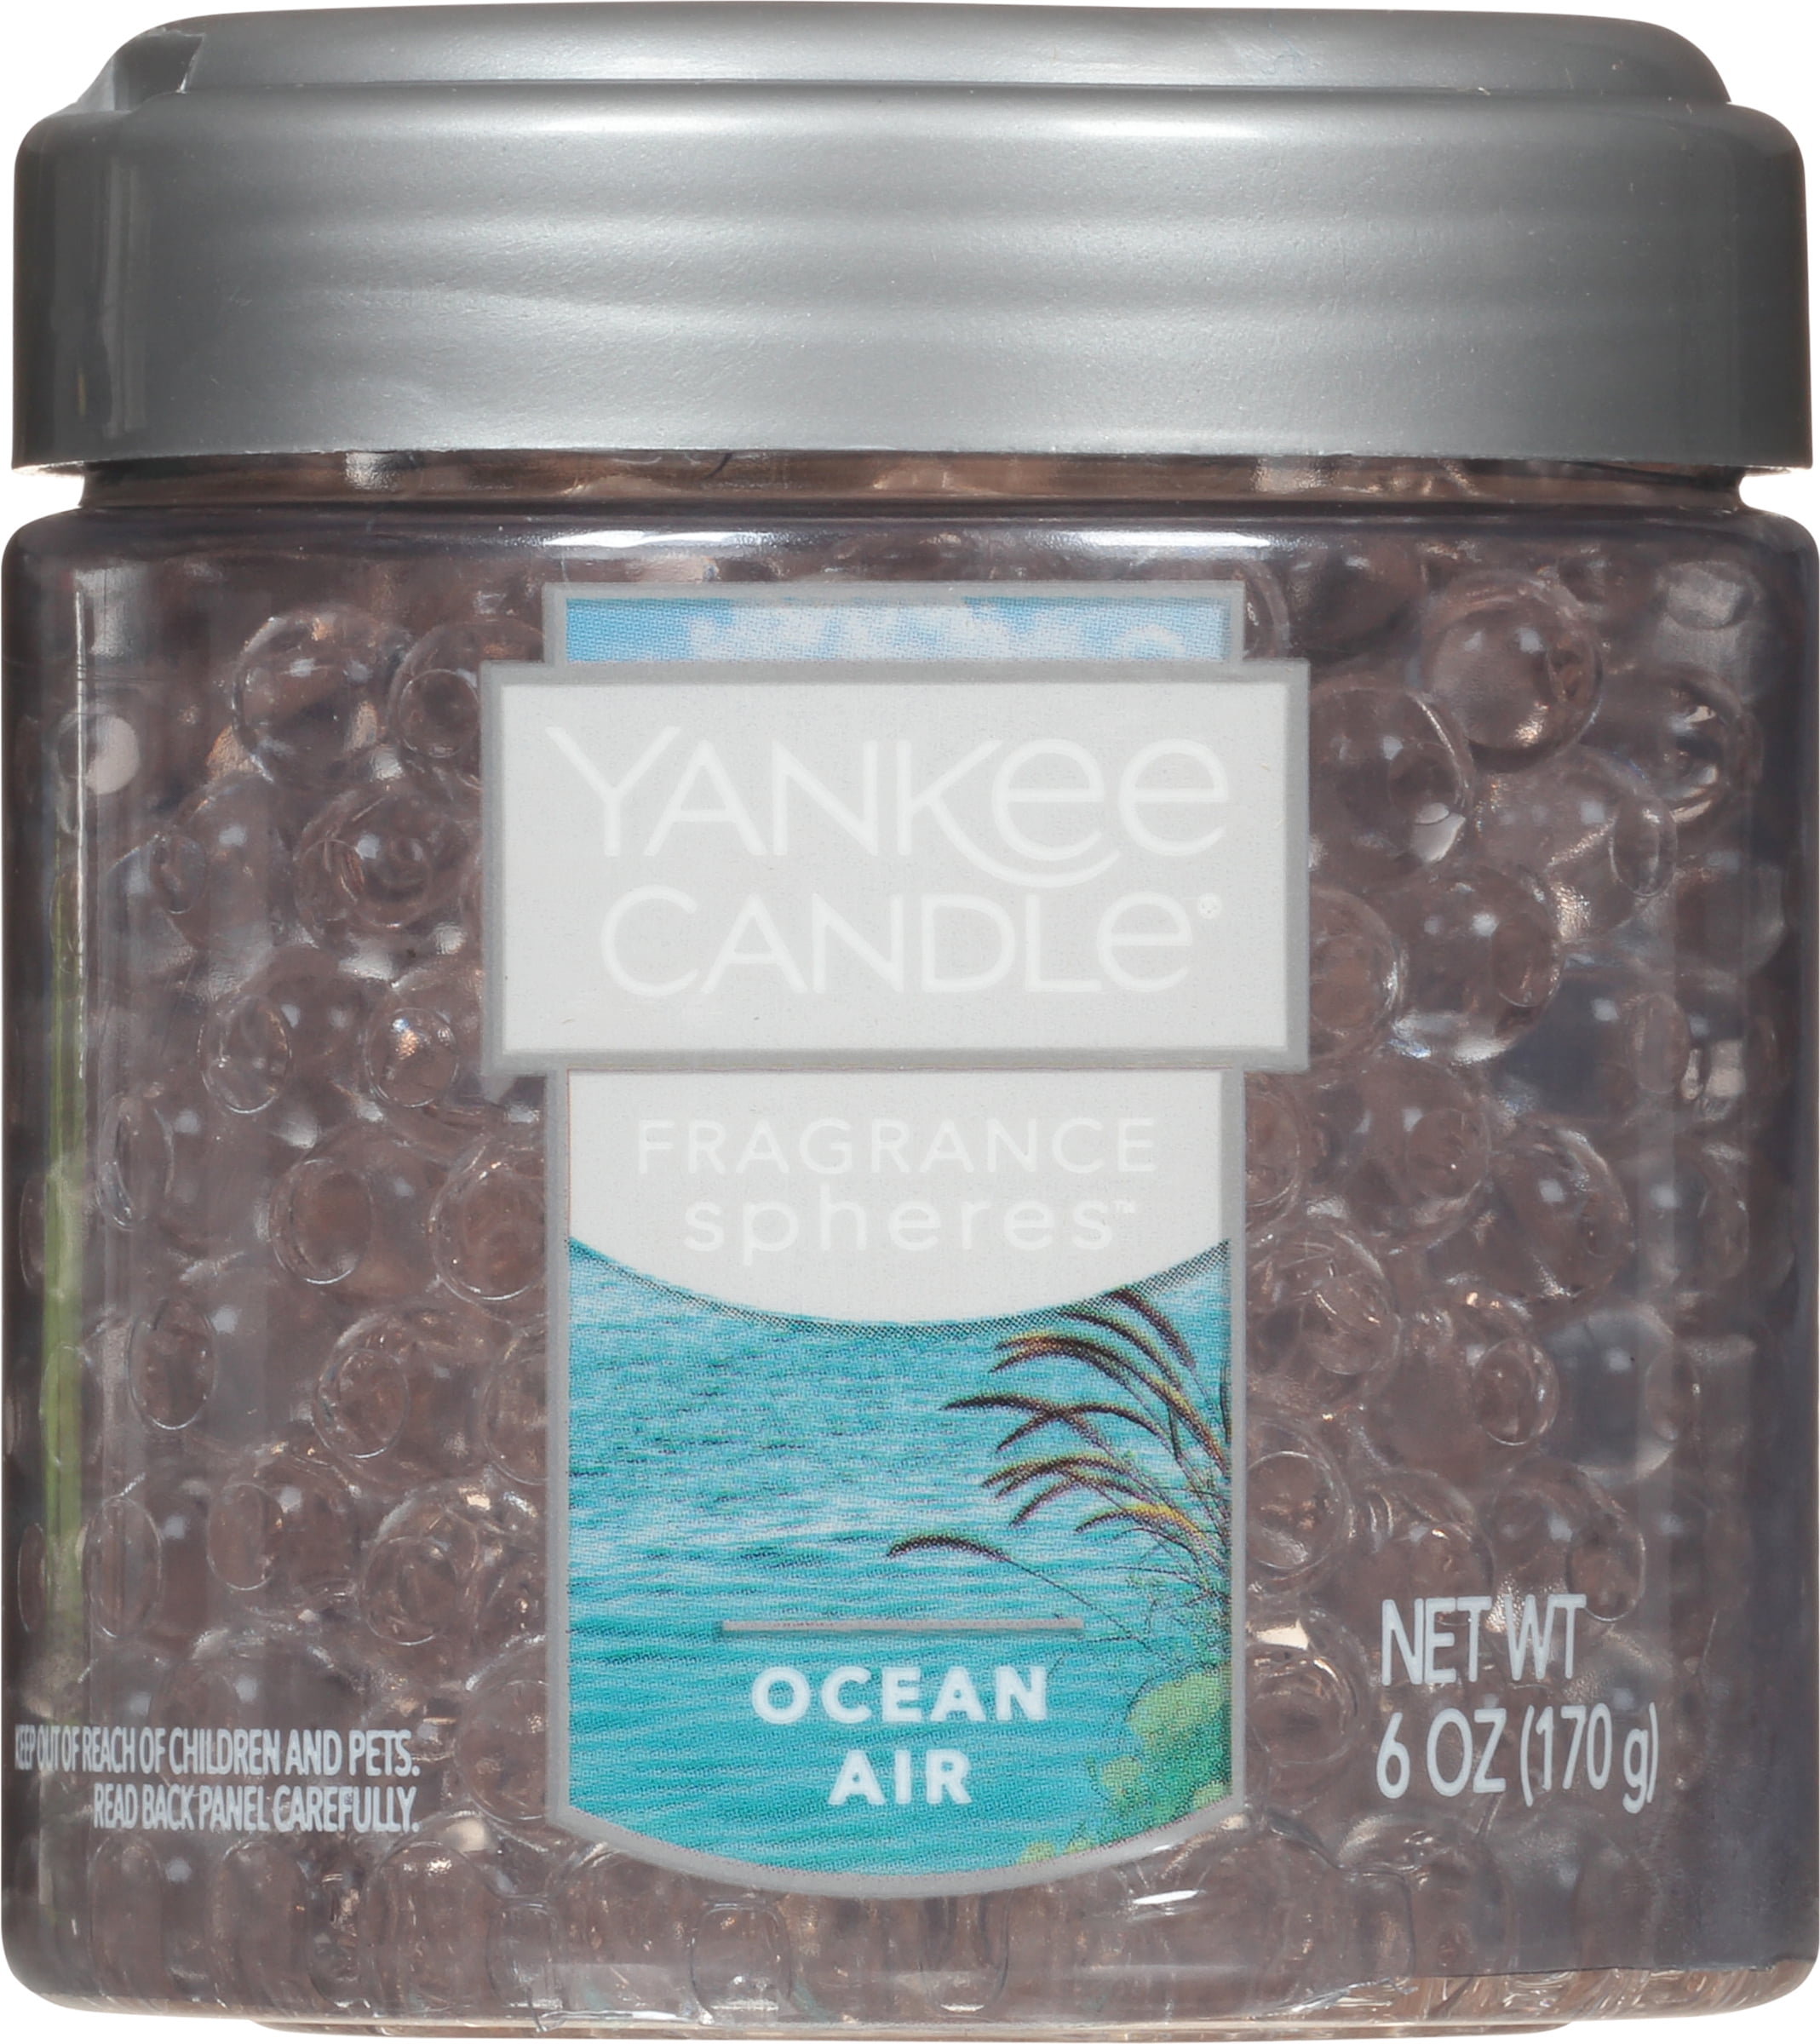 Yankee Candle FRAGRANCE SPHERES Scent Beads AIR FRESHENER 1 x 6 oz Jar 8  CHOICES